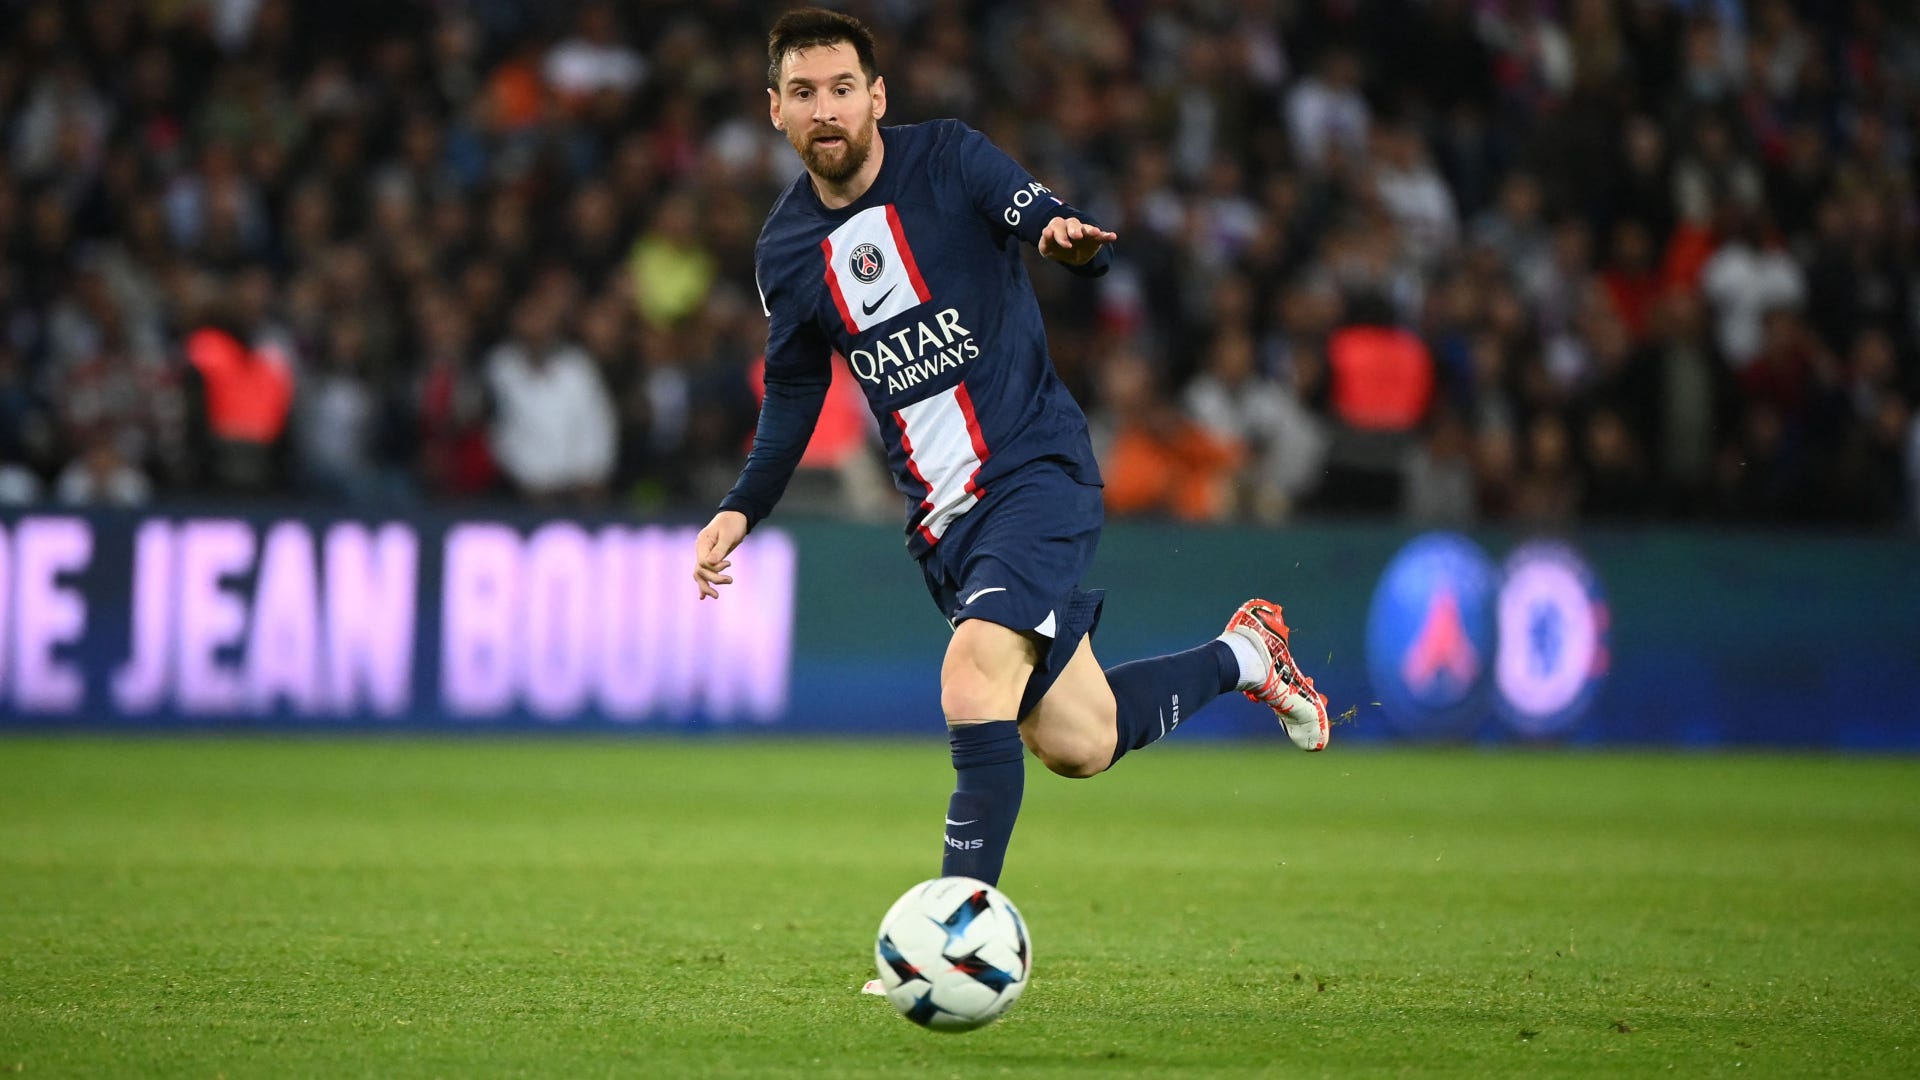 Lorient vs PSG Live stream, TV channel, kick-off time and where to watch Goal English Bahrain